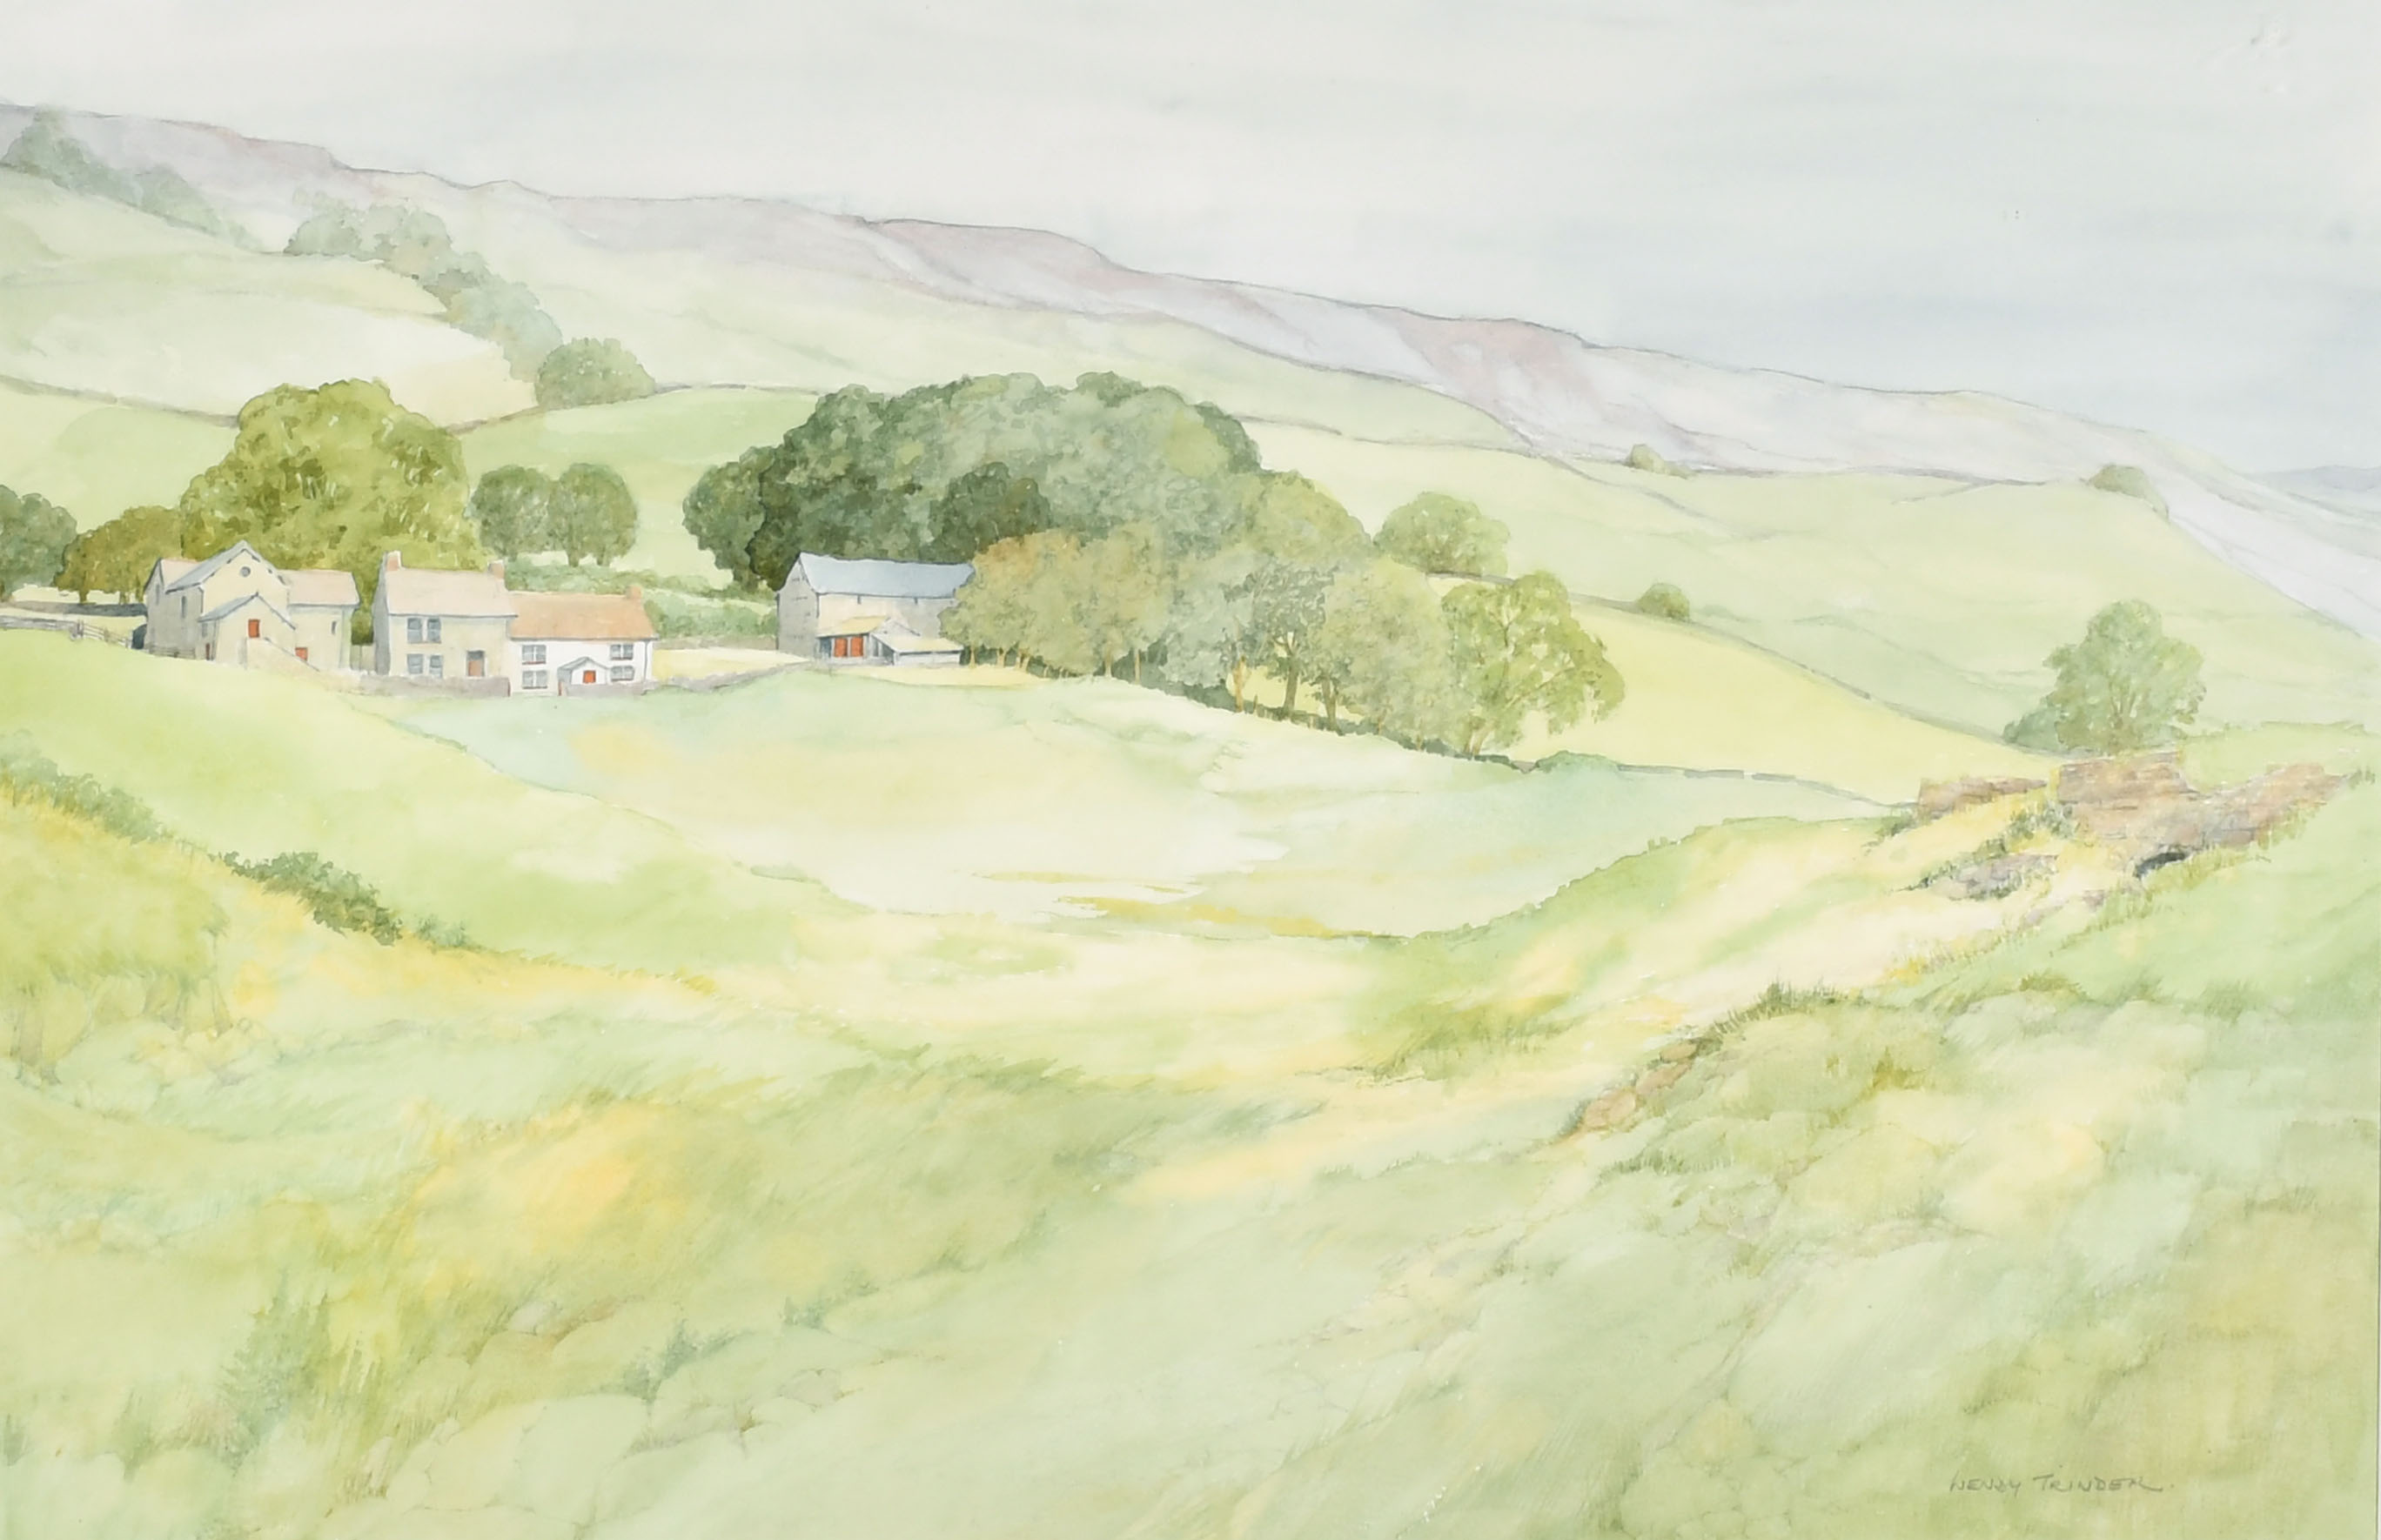 Wendy Trinder (1942-2020) British. "Cumbrian Landscape", Watercolour, Signed in pencil, and